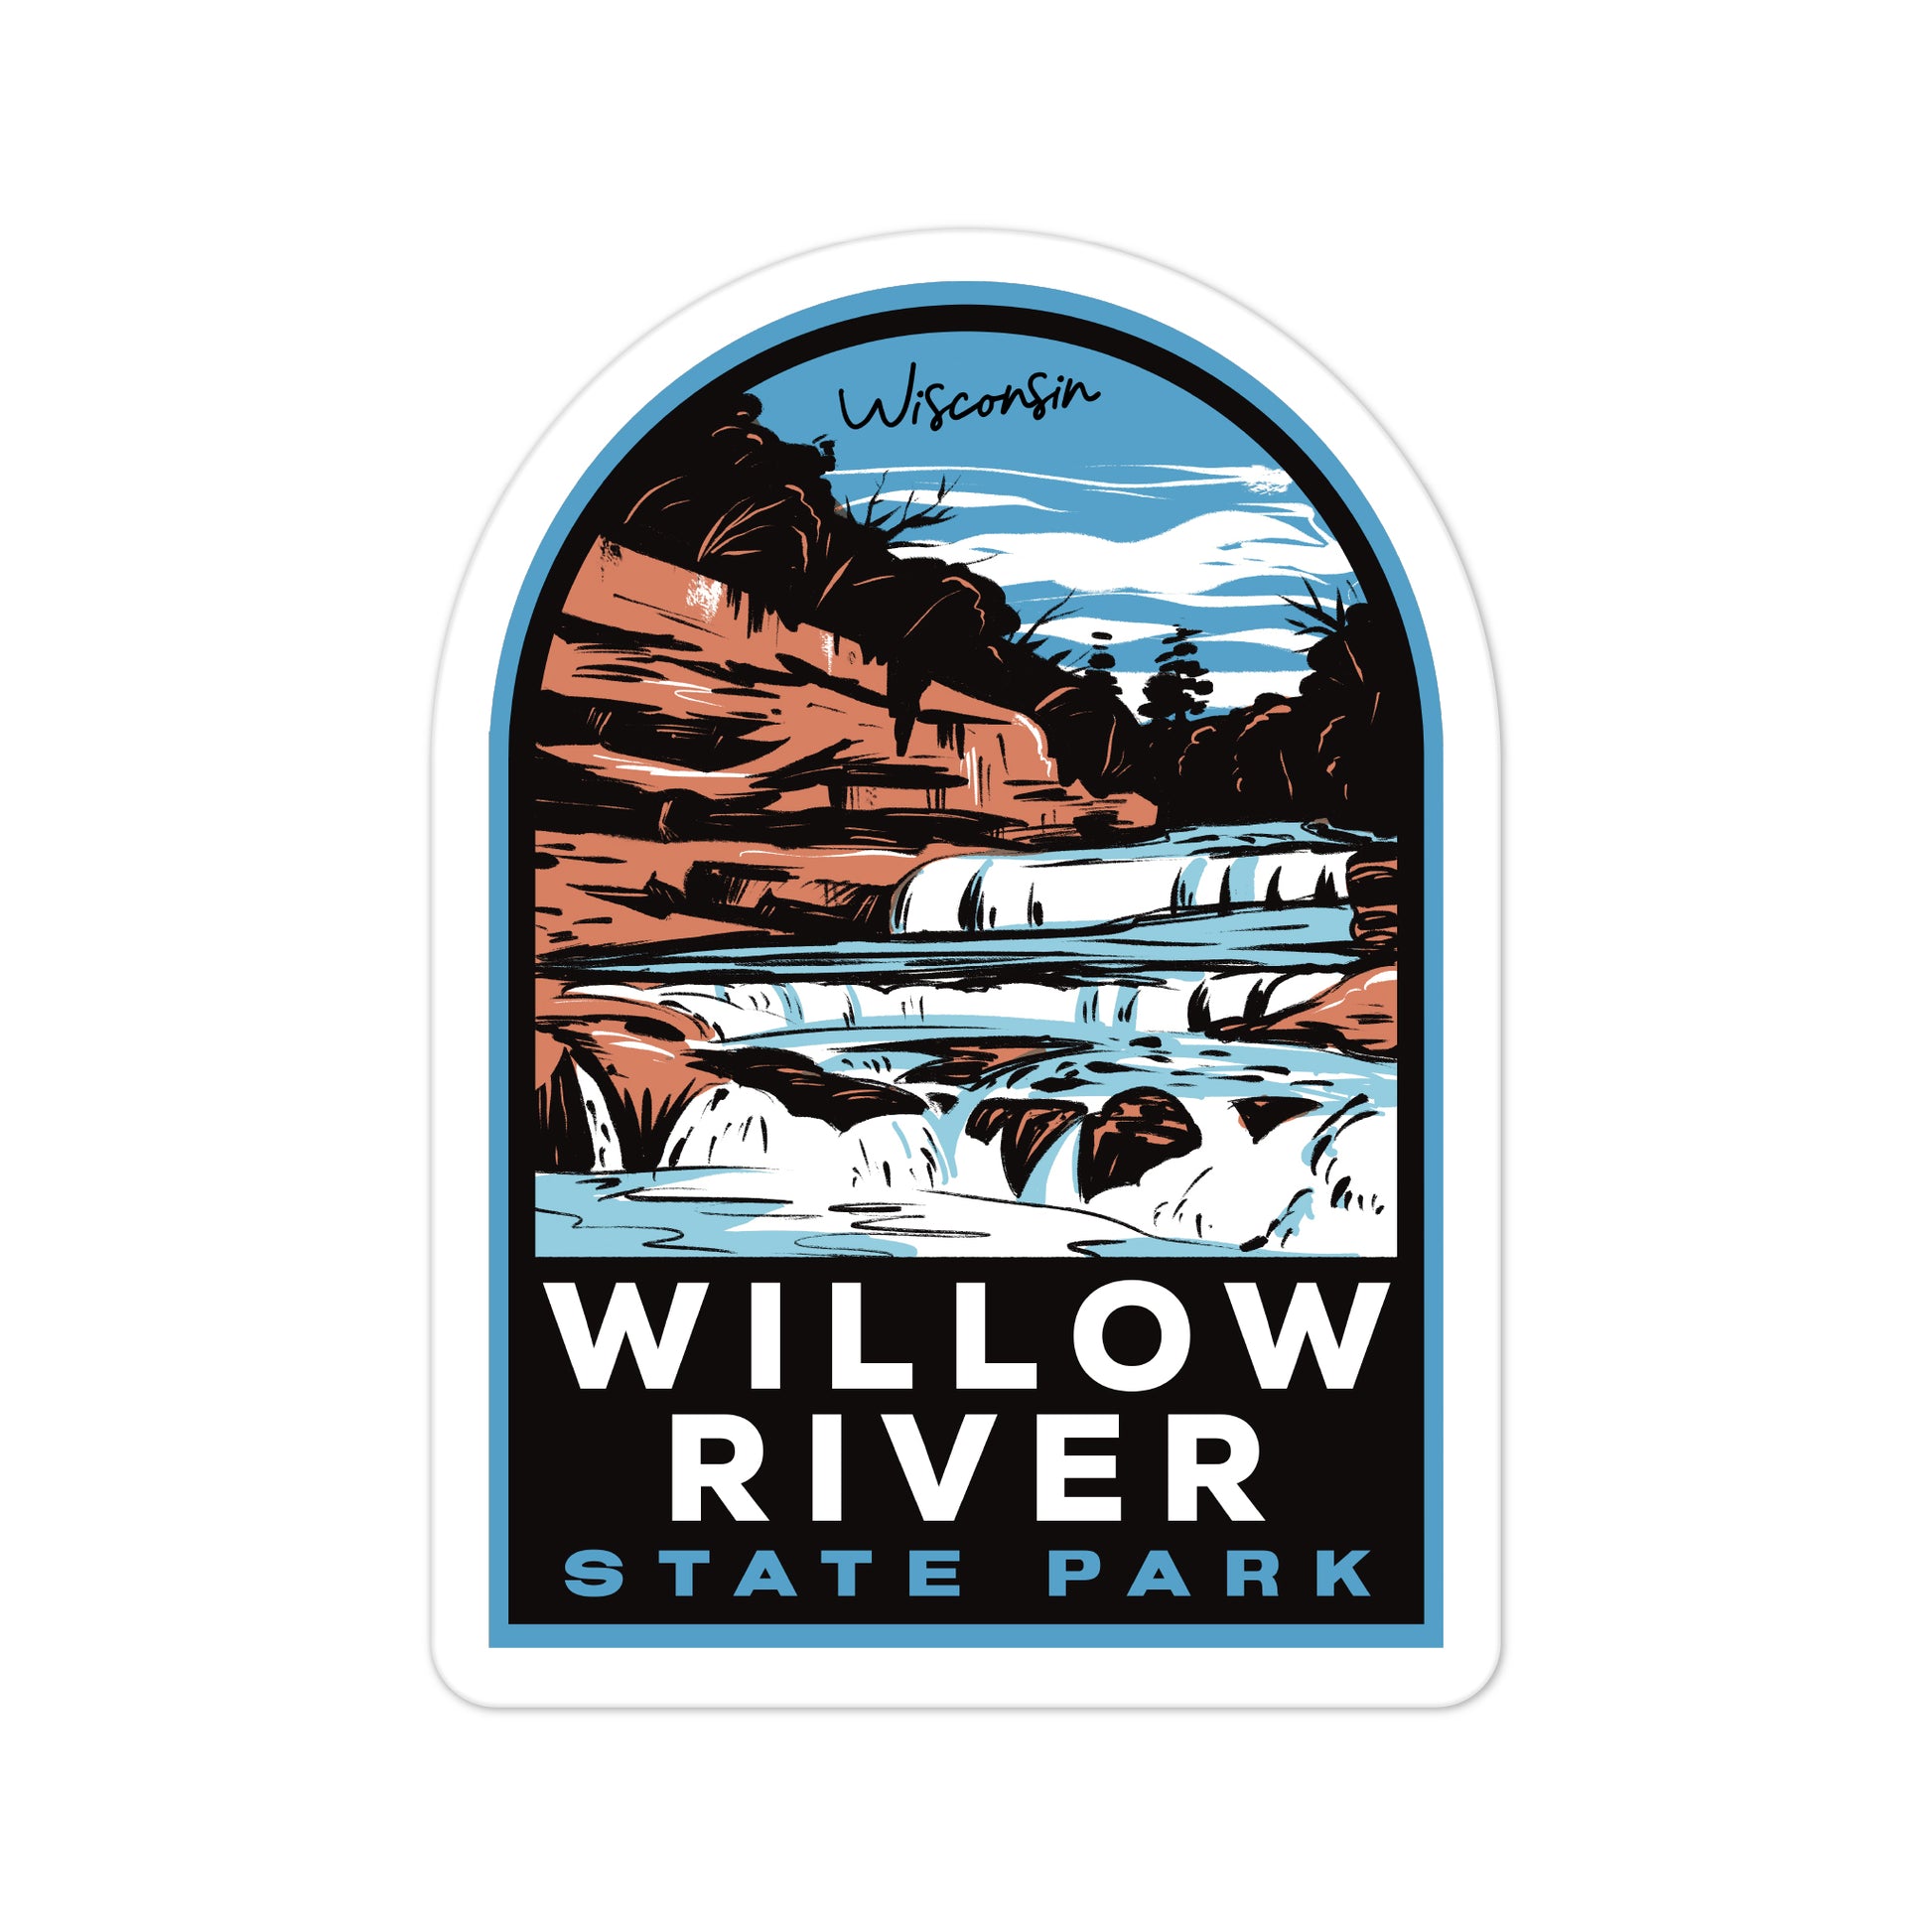 A sticker of Willow River State Park